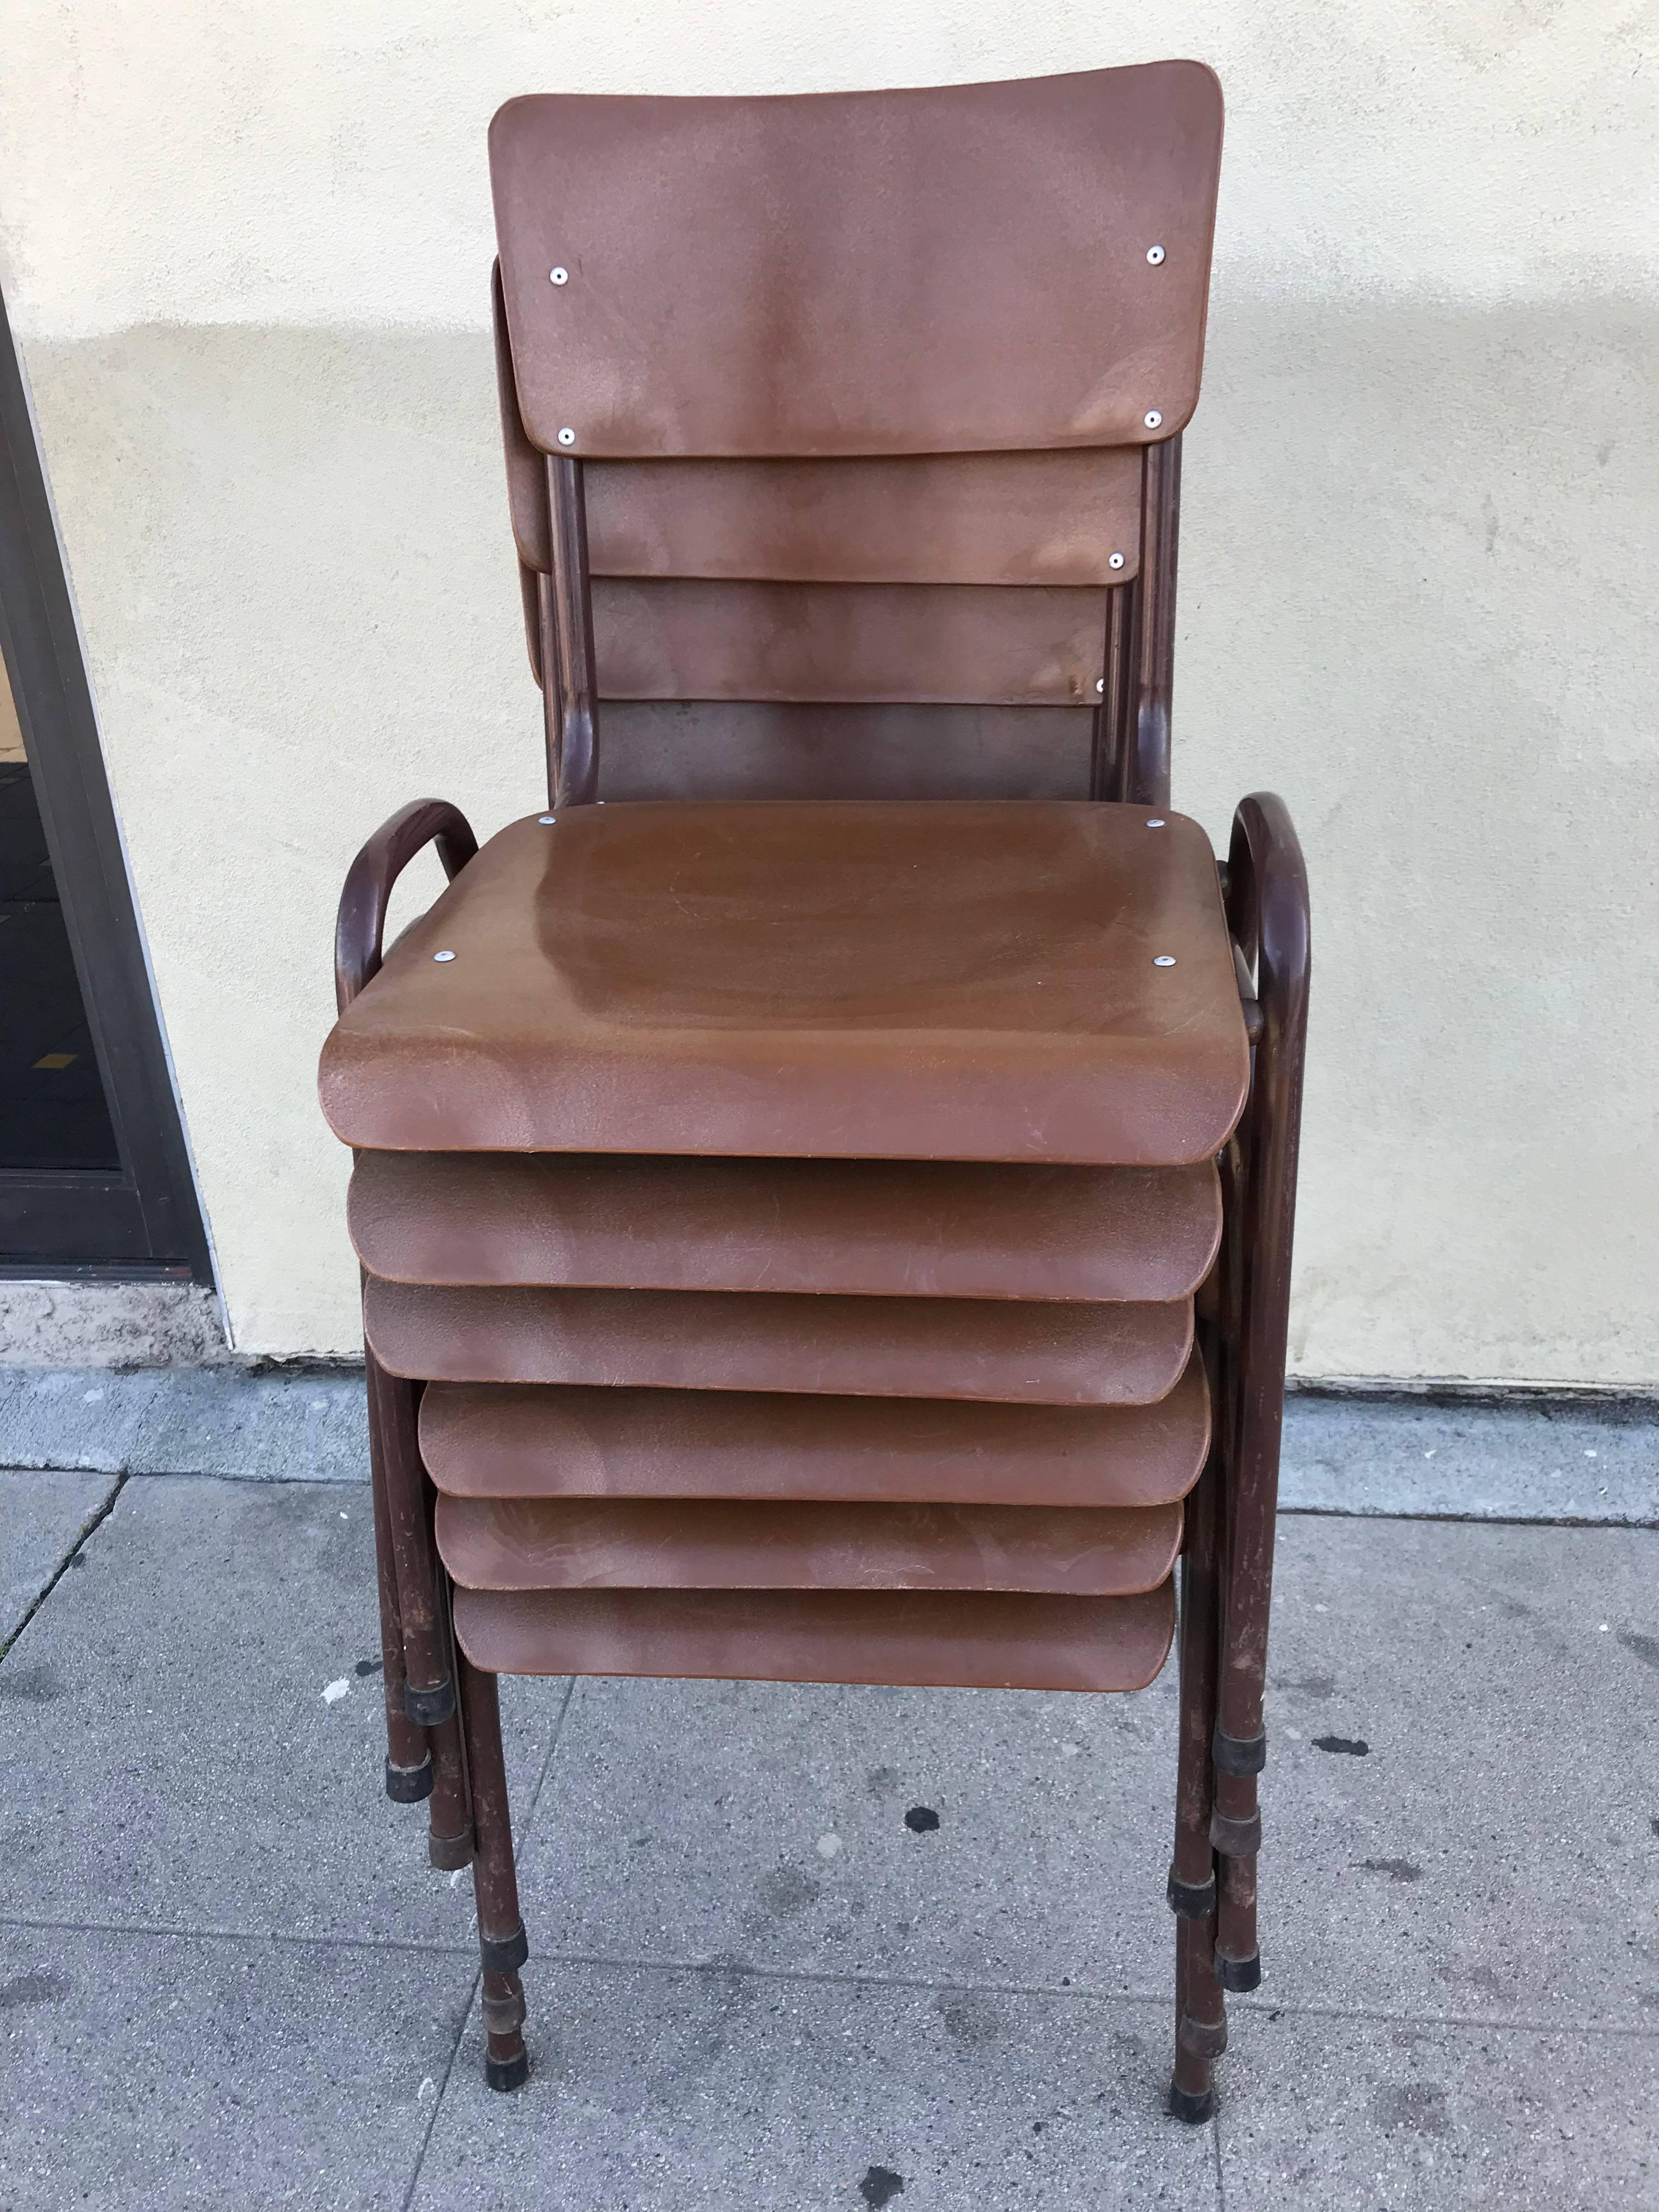 Set of six stackable school chairs in brown lacquer metal and strong brown plastic.